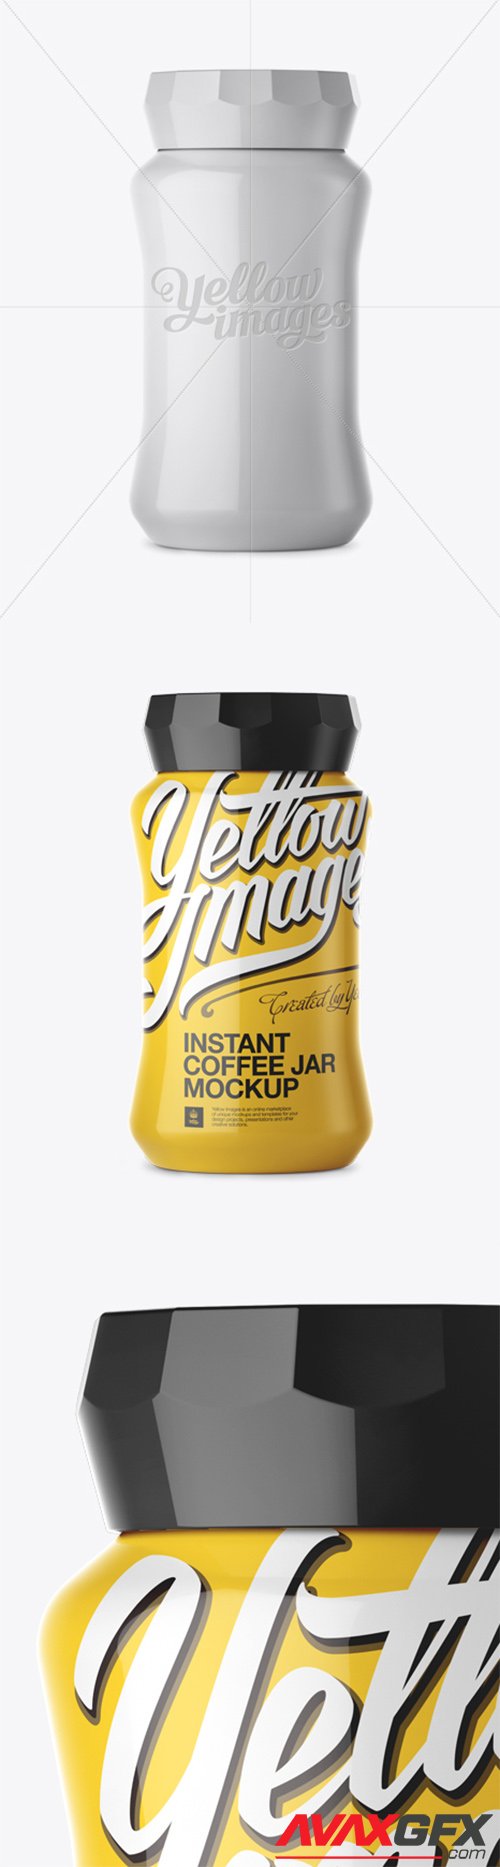 Instant Coffee Jar With Gloss Finish Mockup 13614